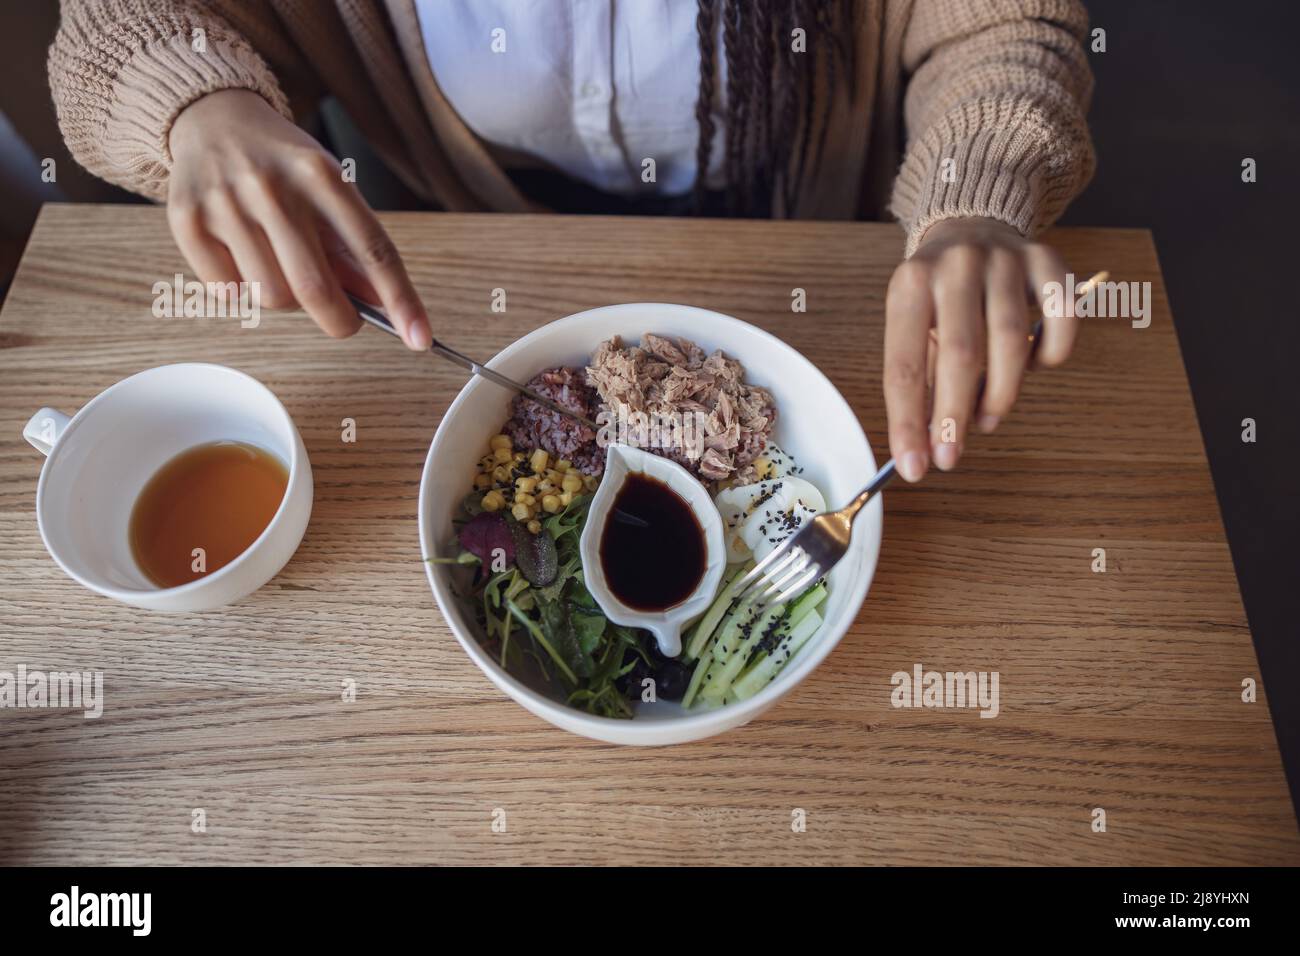 Top view to female hands holding fork and knife and eating delicious healthy food served in a white ceramic bowl Stock Photo